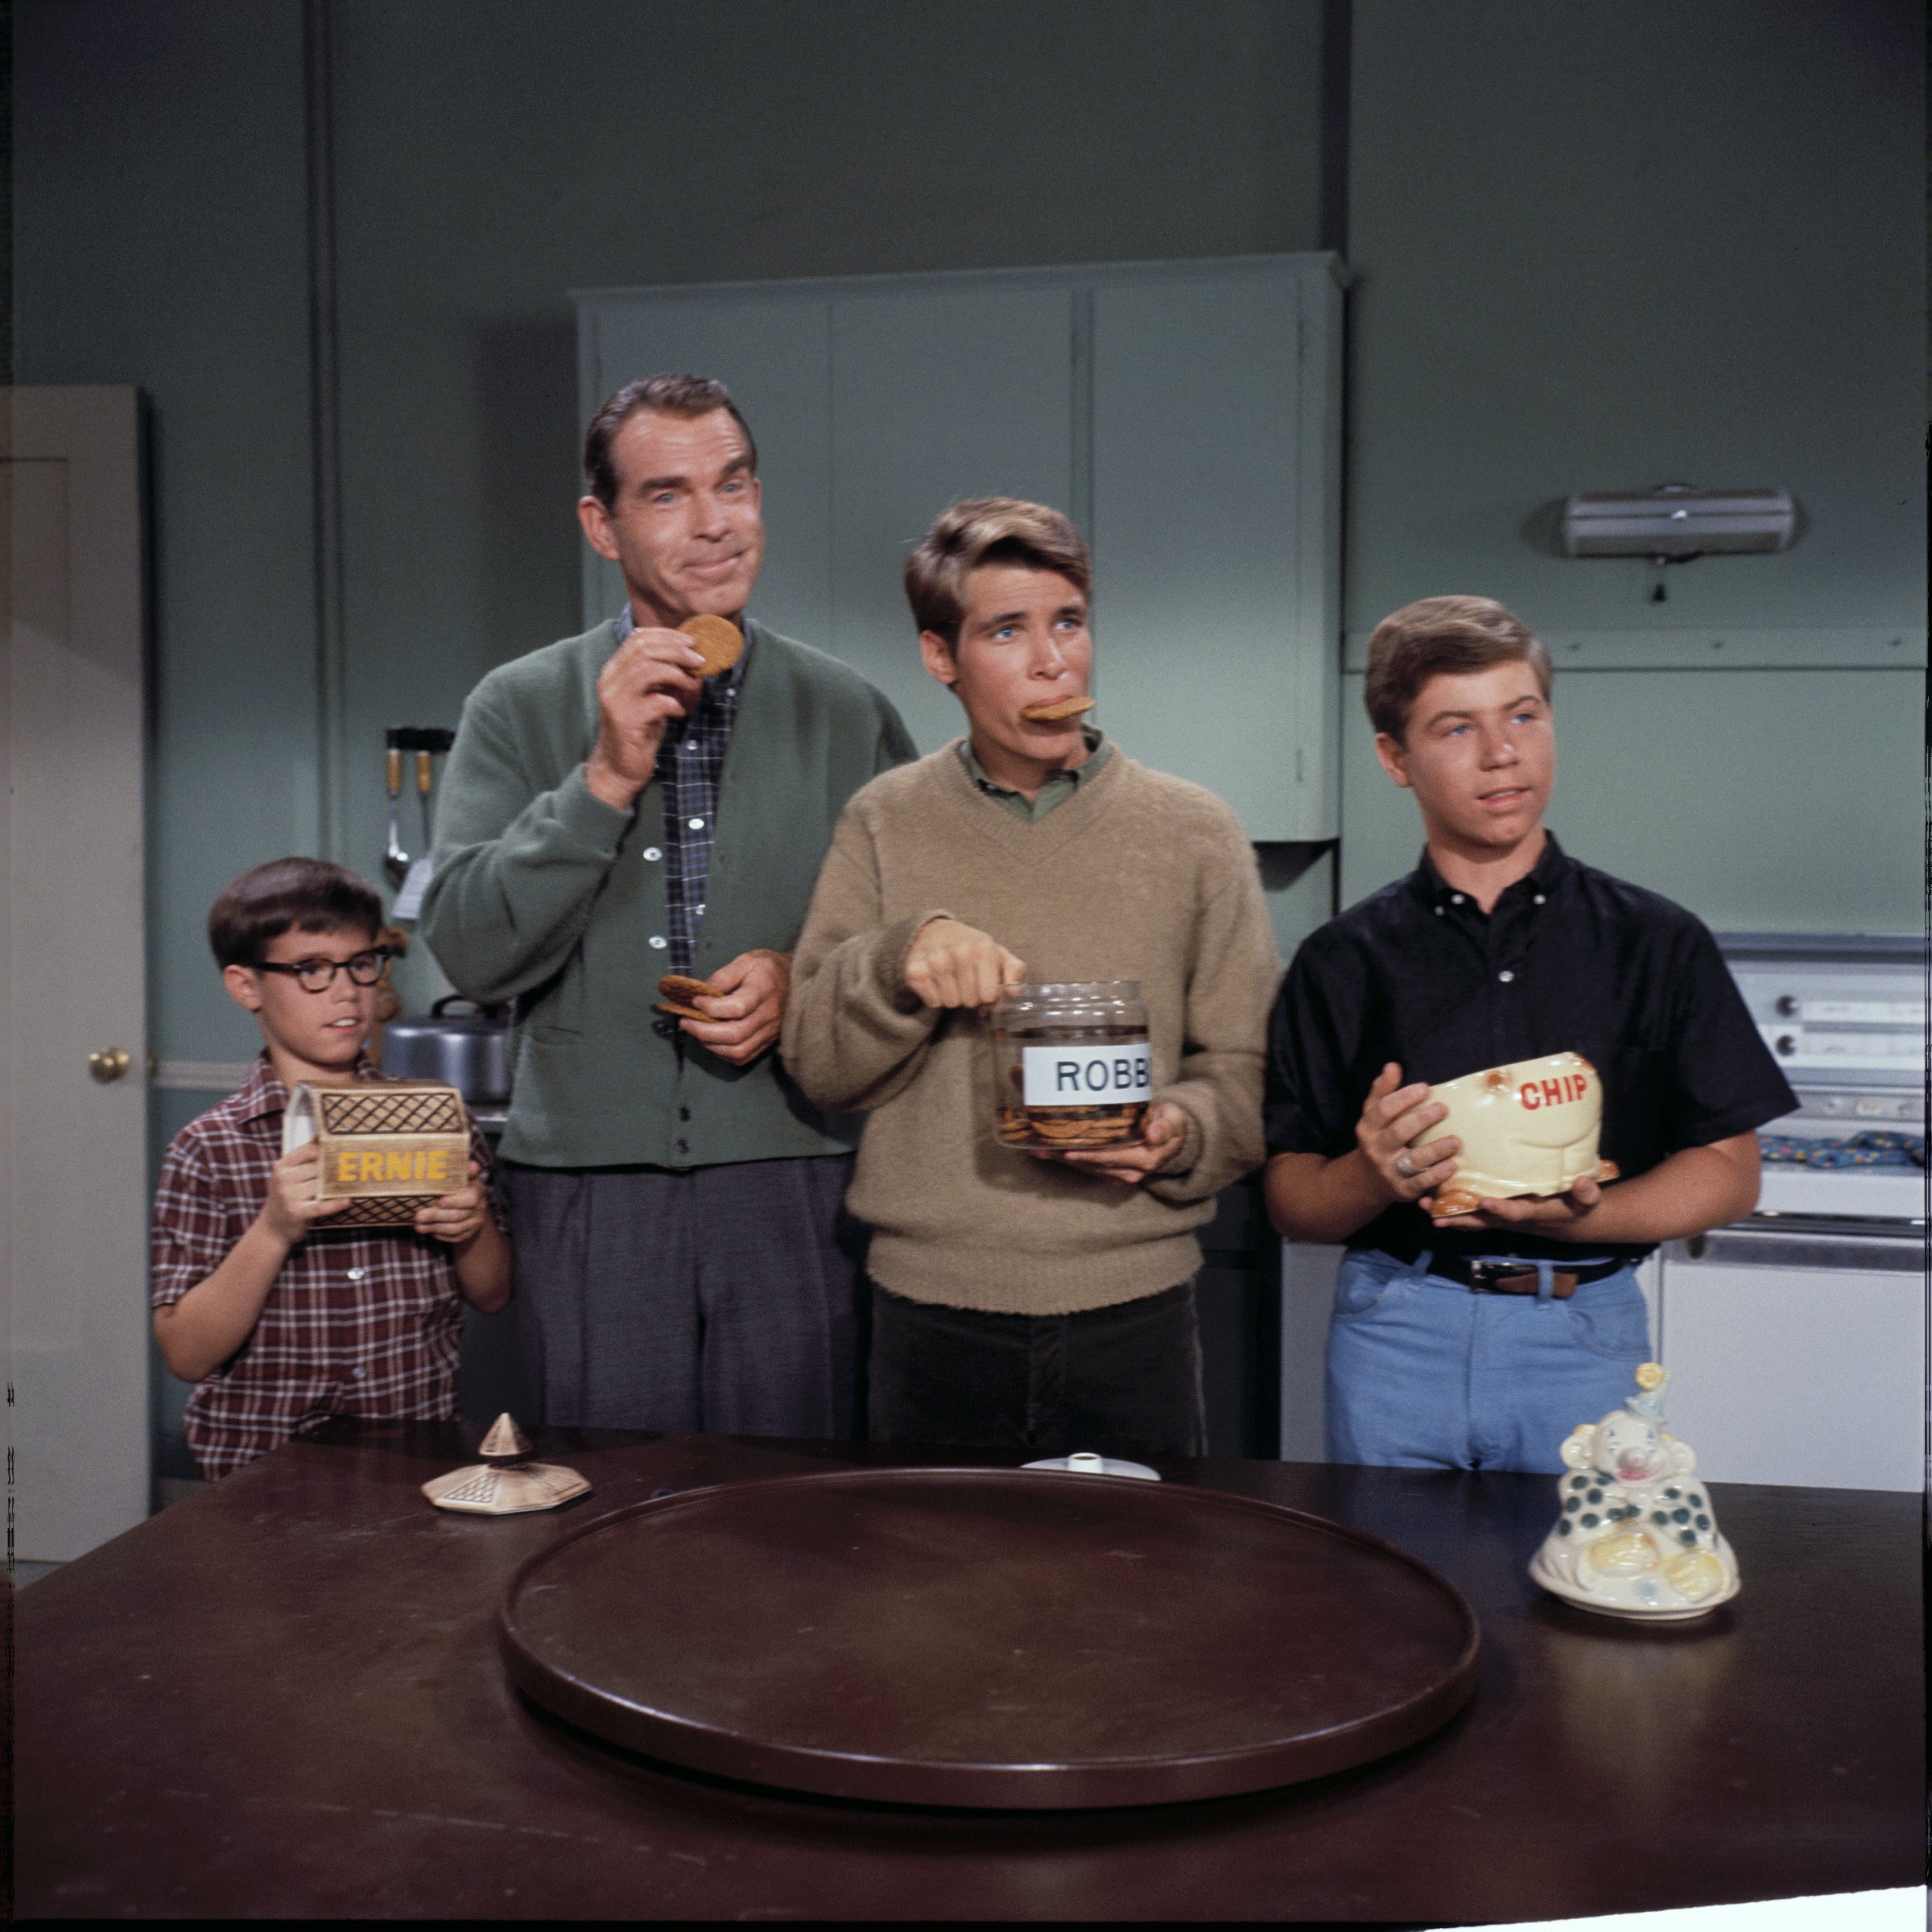 The cast of "My Three Sons," Barry Livingston as Ernie Thompson Douglas, Fred MacMurray as Steve Douglas, Don Grady as Robbie Douglas, and Stanley Livingston as Chip Douglas, were pictured while filming. | Source: Getty Images